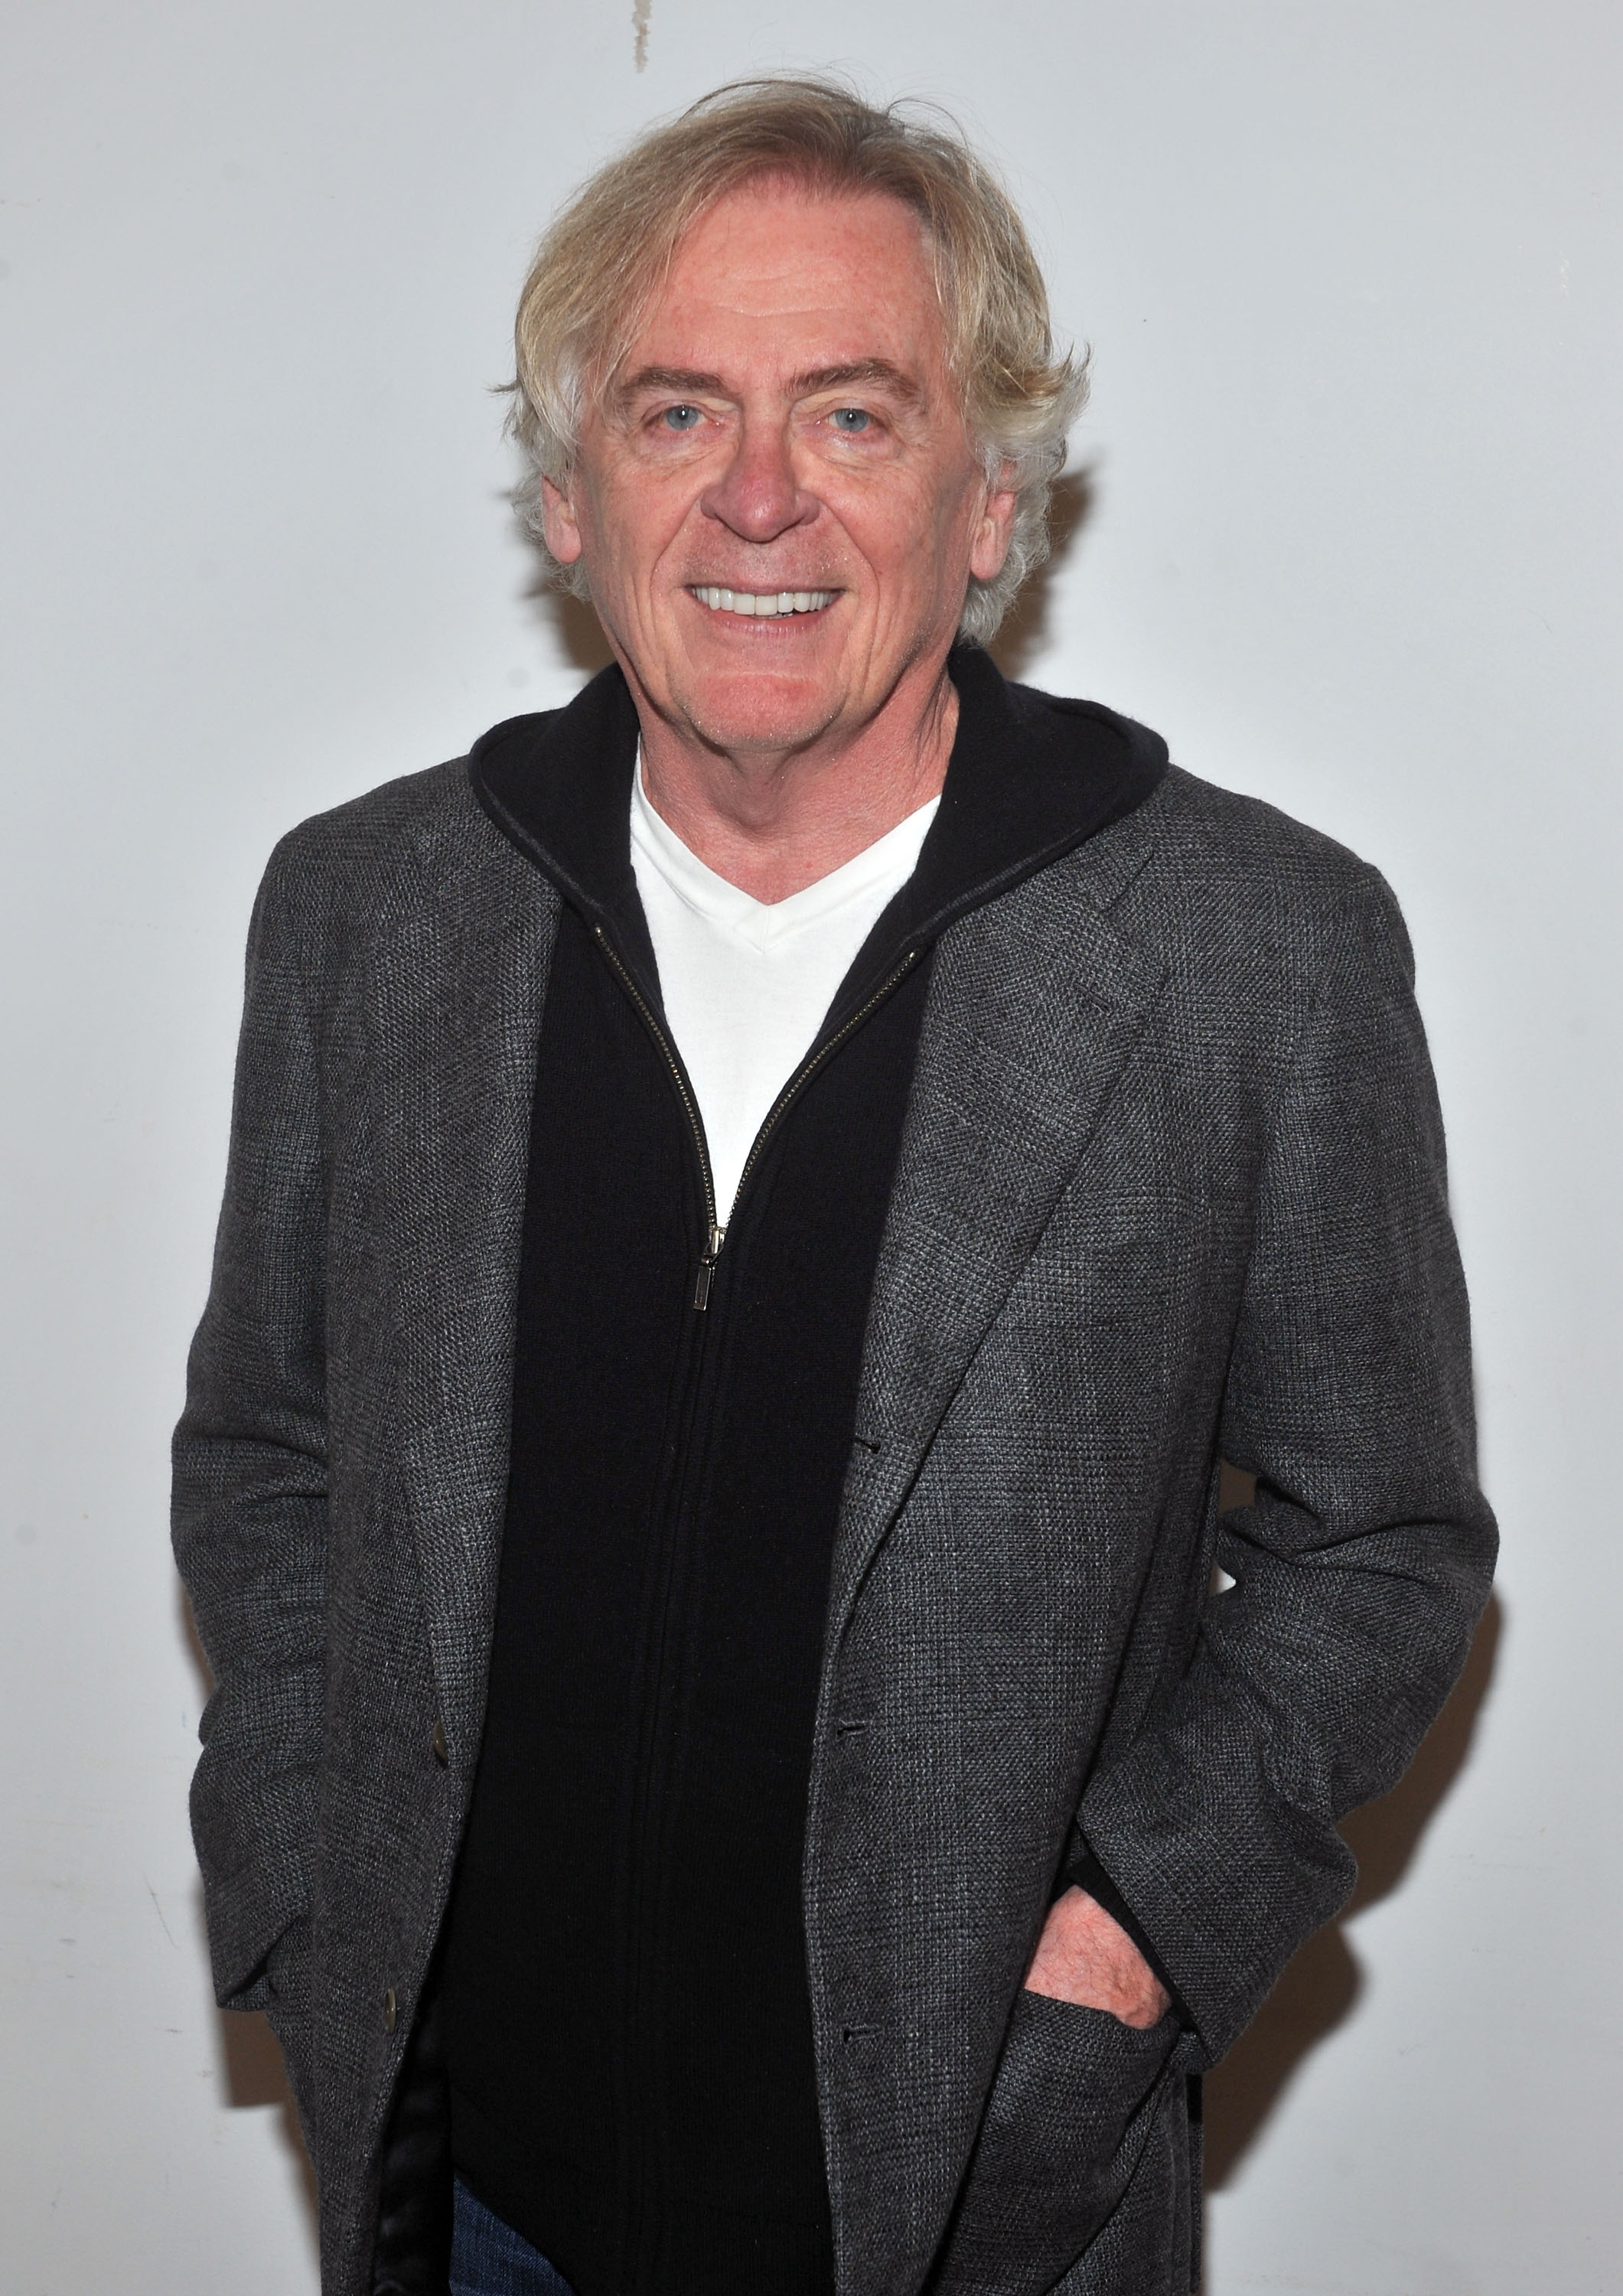 Daniel Davis at the "Black Tie" cast photo call on December 21, 2010 | Photo: GettyImages